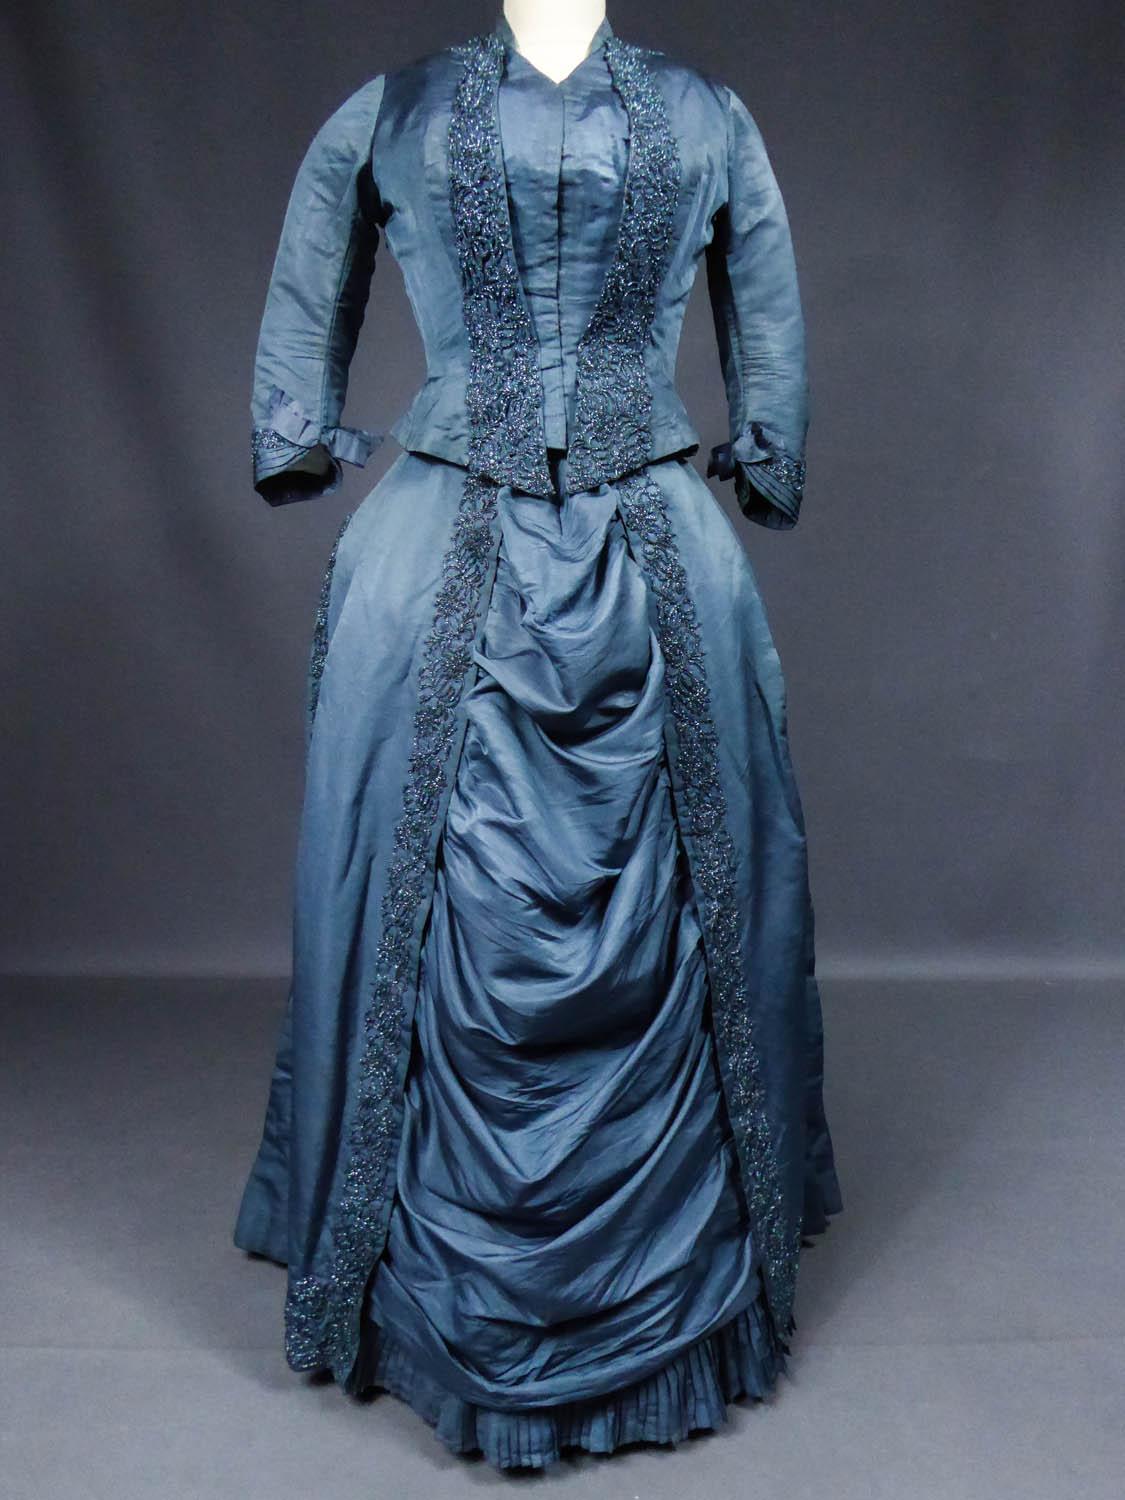 Circa 1880/1890
France Lyon

Beautiful turned over reception or dinner dress with a train by Madame Seine in Lyon around 1885. Bodice and skirt in fluted Prussian blue silk ottoman embellished with applied embroidery in river of iridescent blue